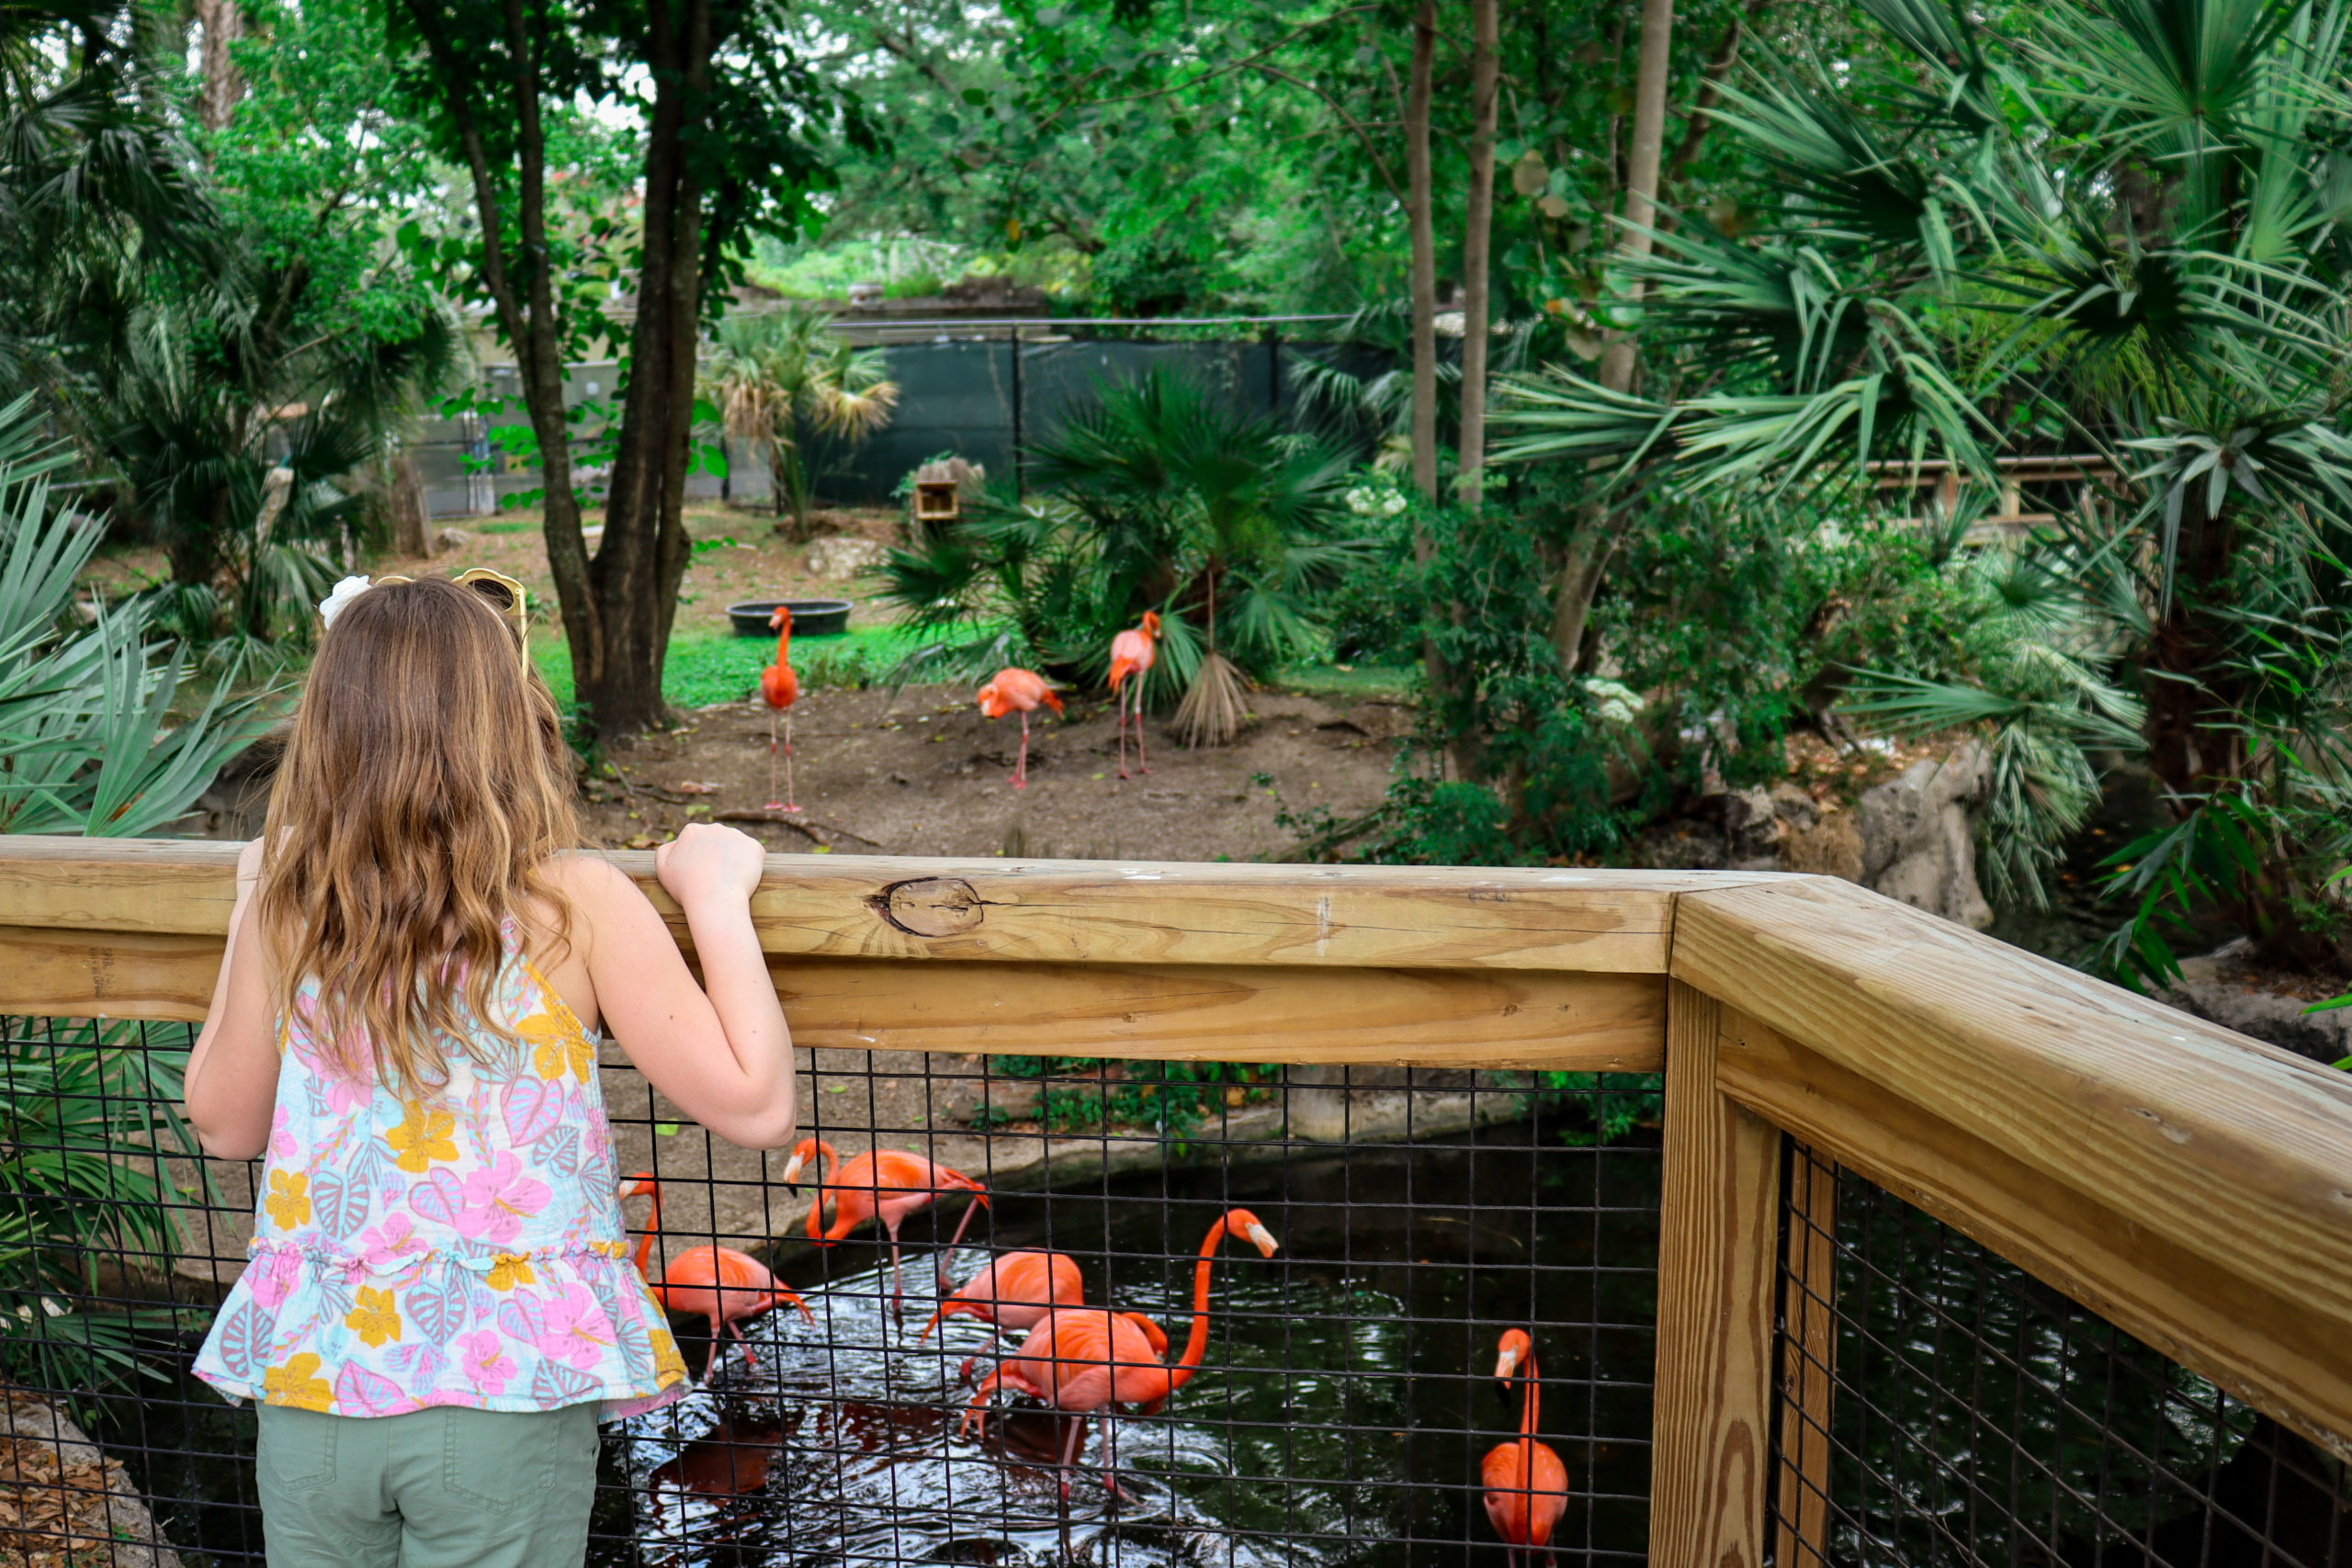 A young girl looks at flamingos within an exhibit at ZooTampa.